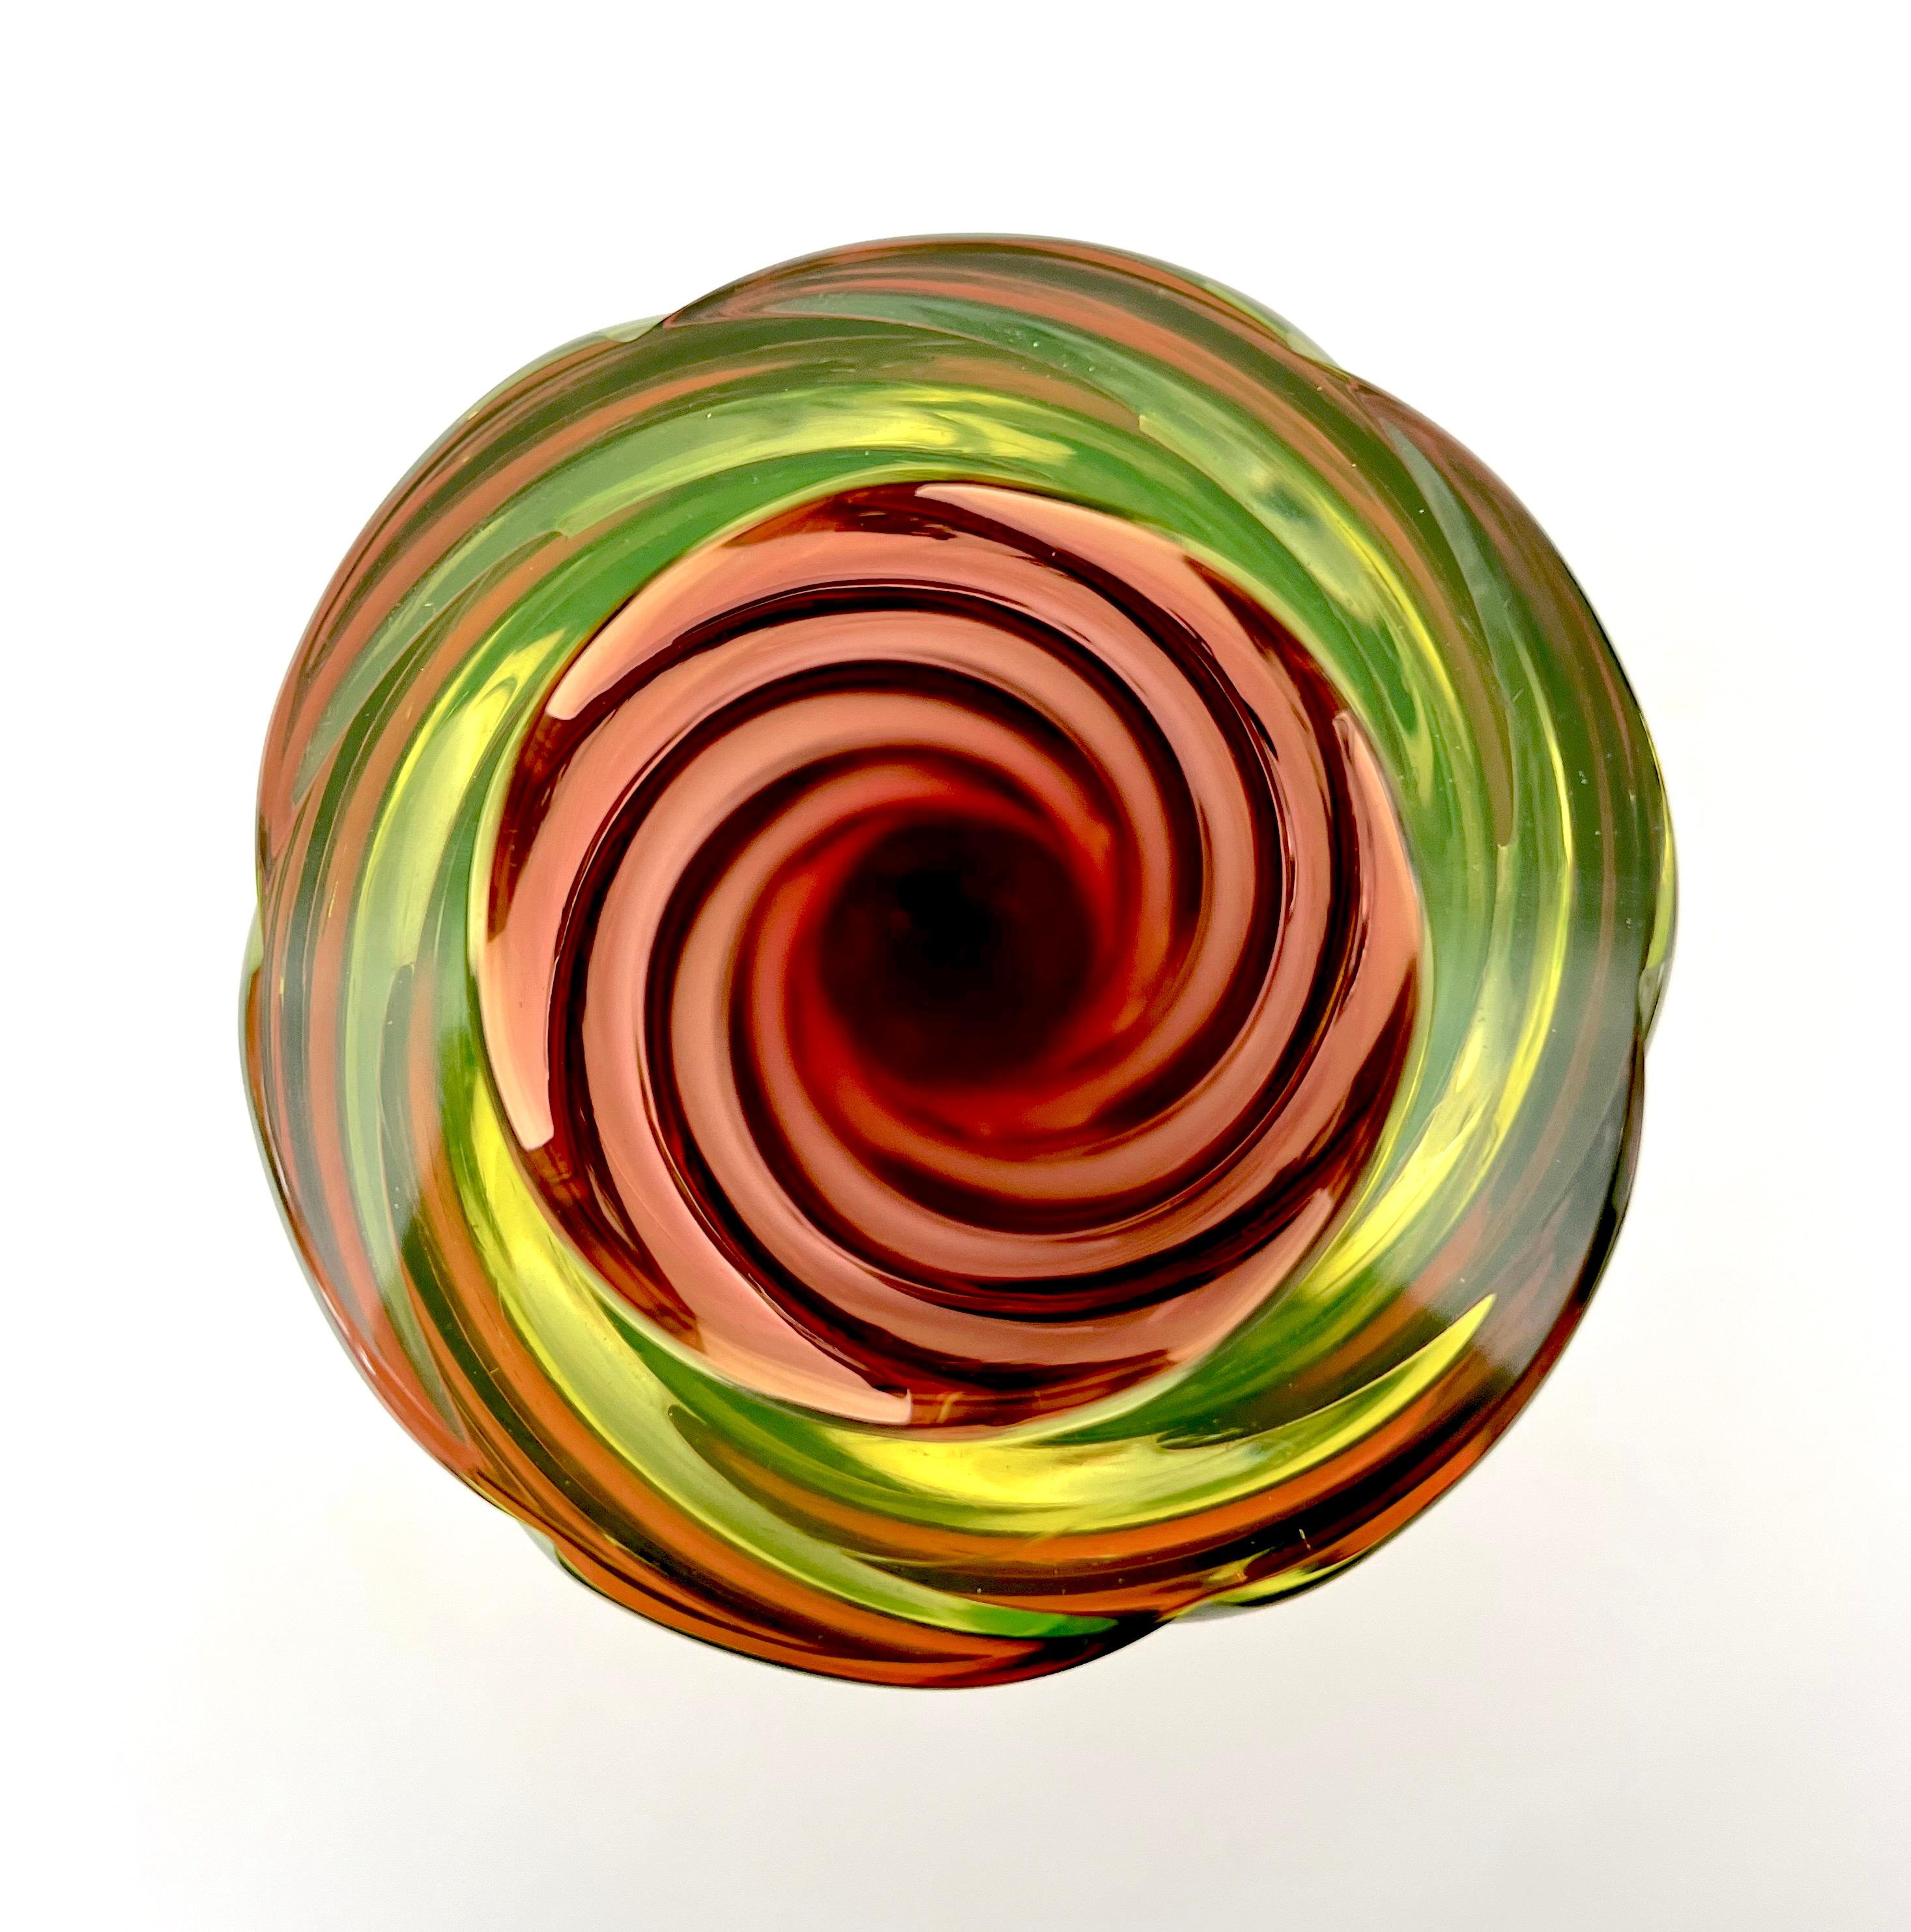 Rare multi-colored ribbed vase by Archimede Seguso for Seguso Vetri d'Arte with possible hand of Flavio Poli. The dynamics and color change as you move this large vase around from yellow and green on the outer edge to a taupe cinnabar cranberryish